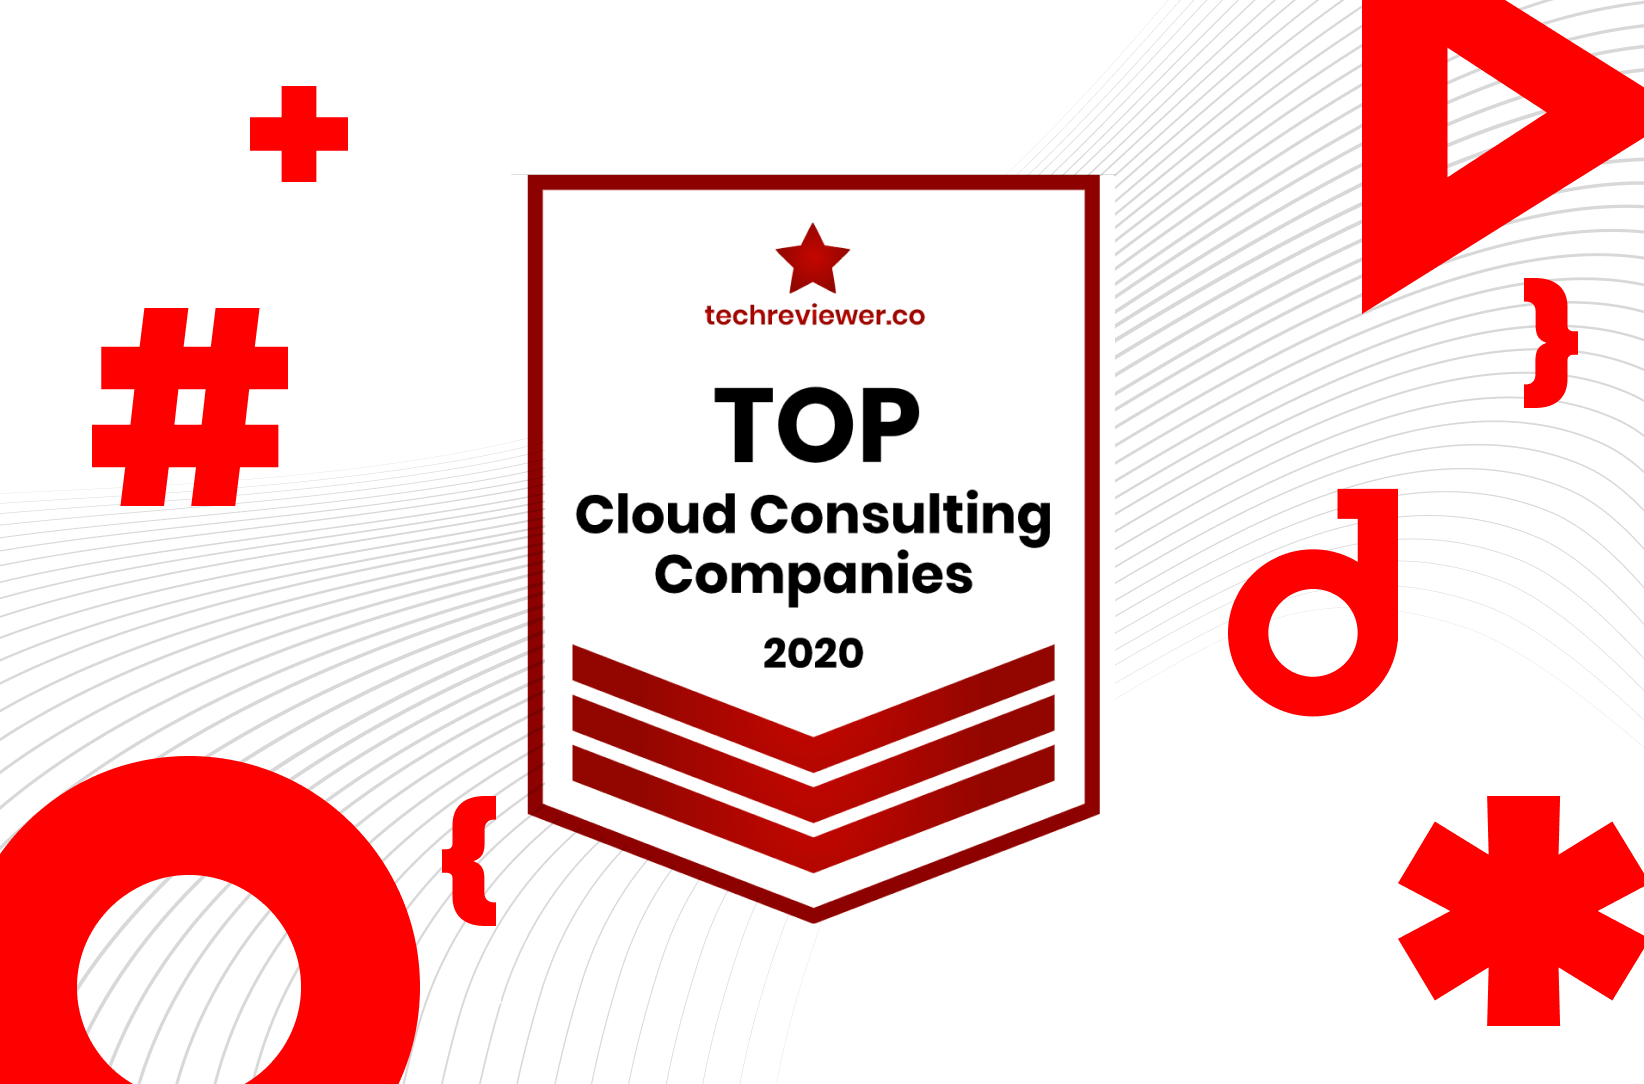 Symphony Solutions recognized as Top Cloud Consulting Company in 2020